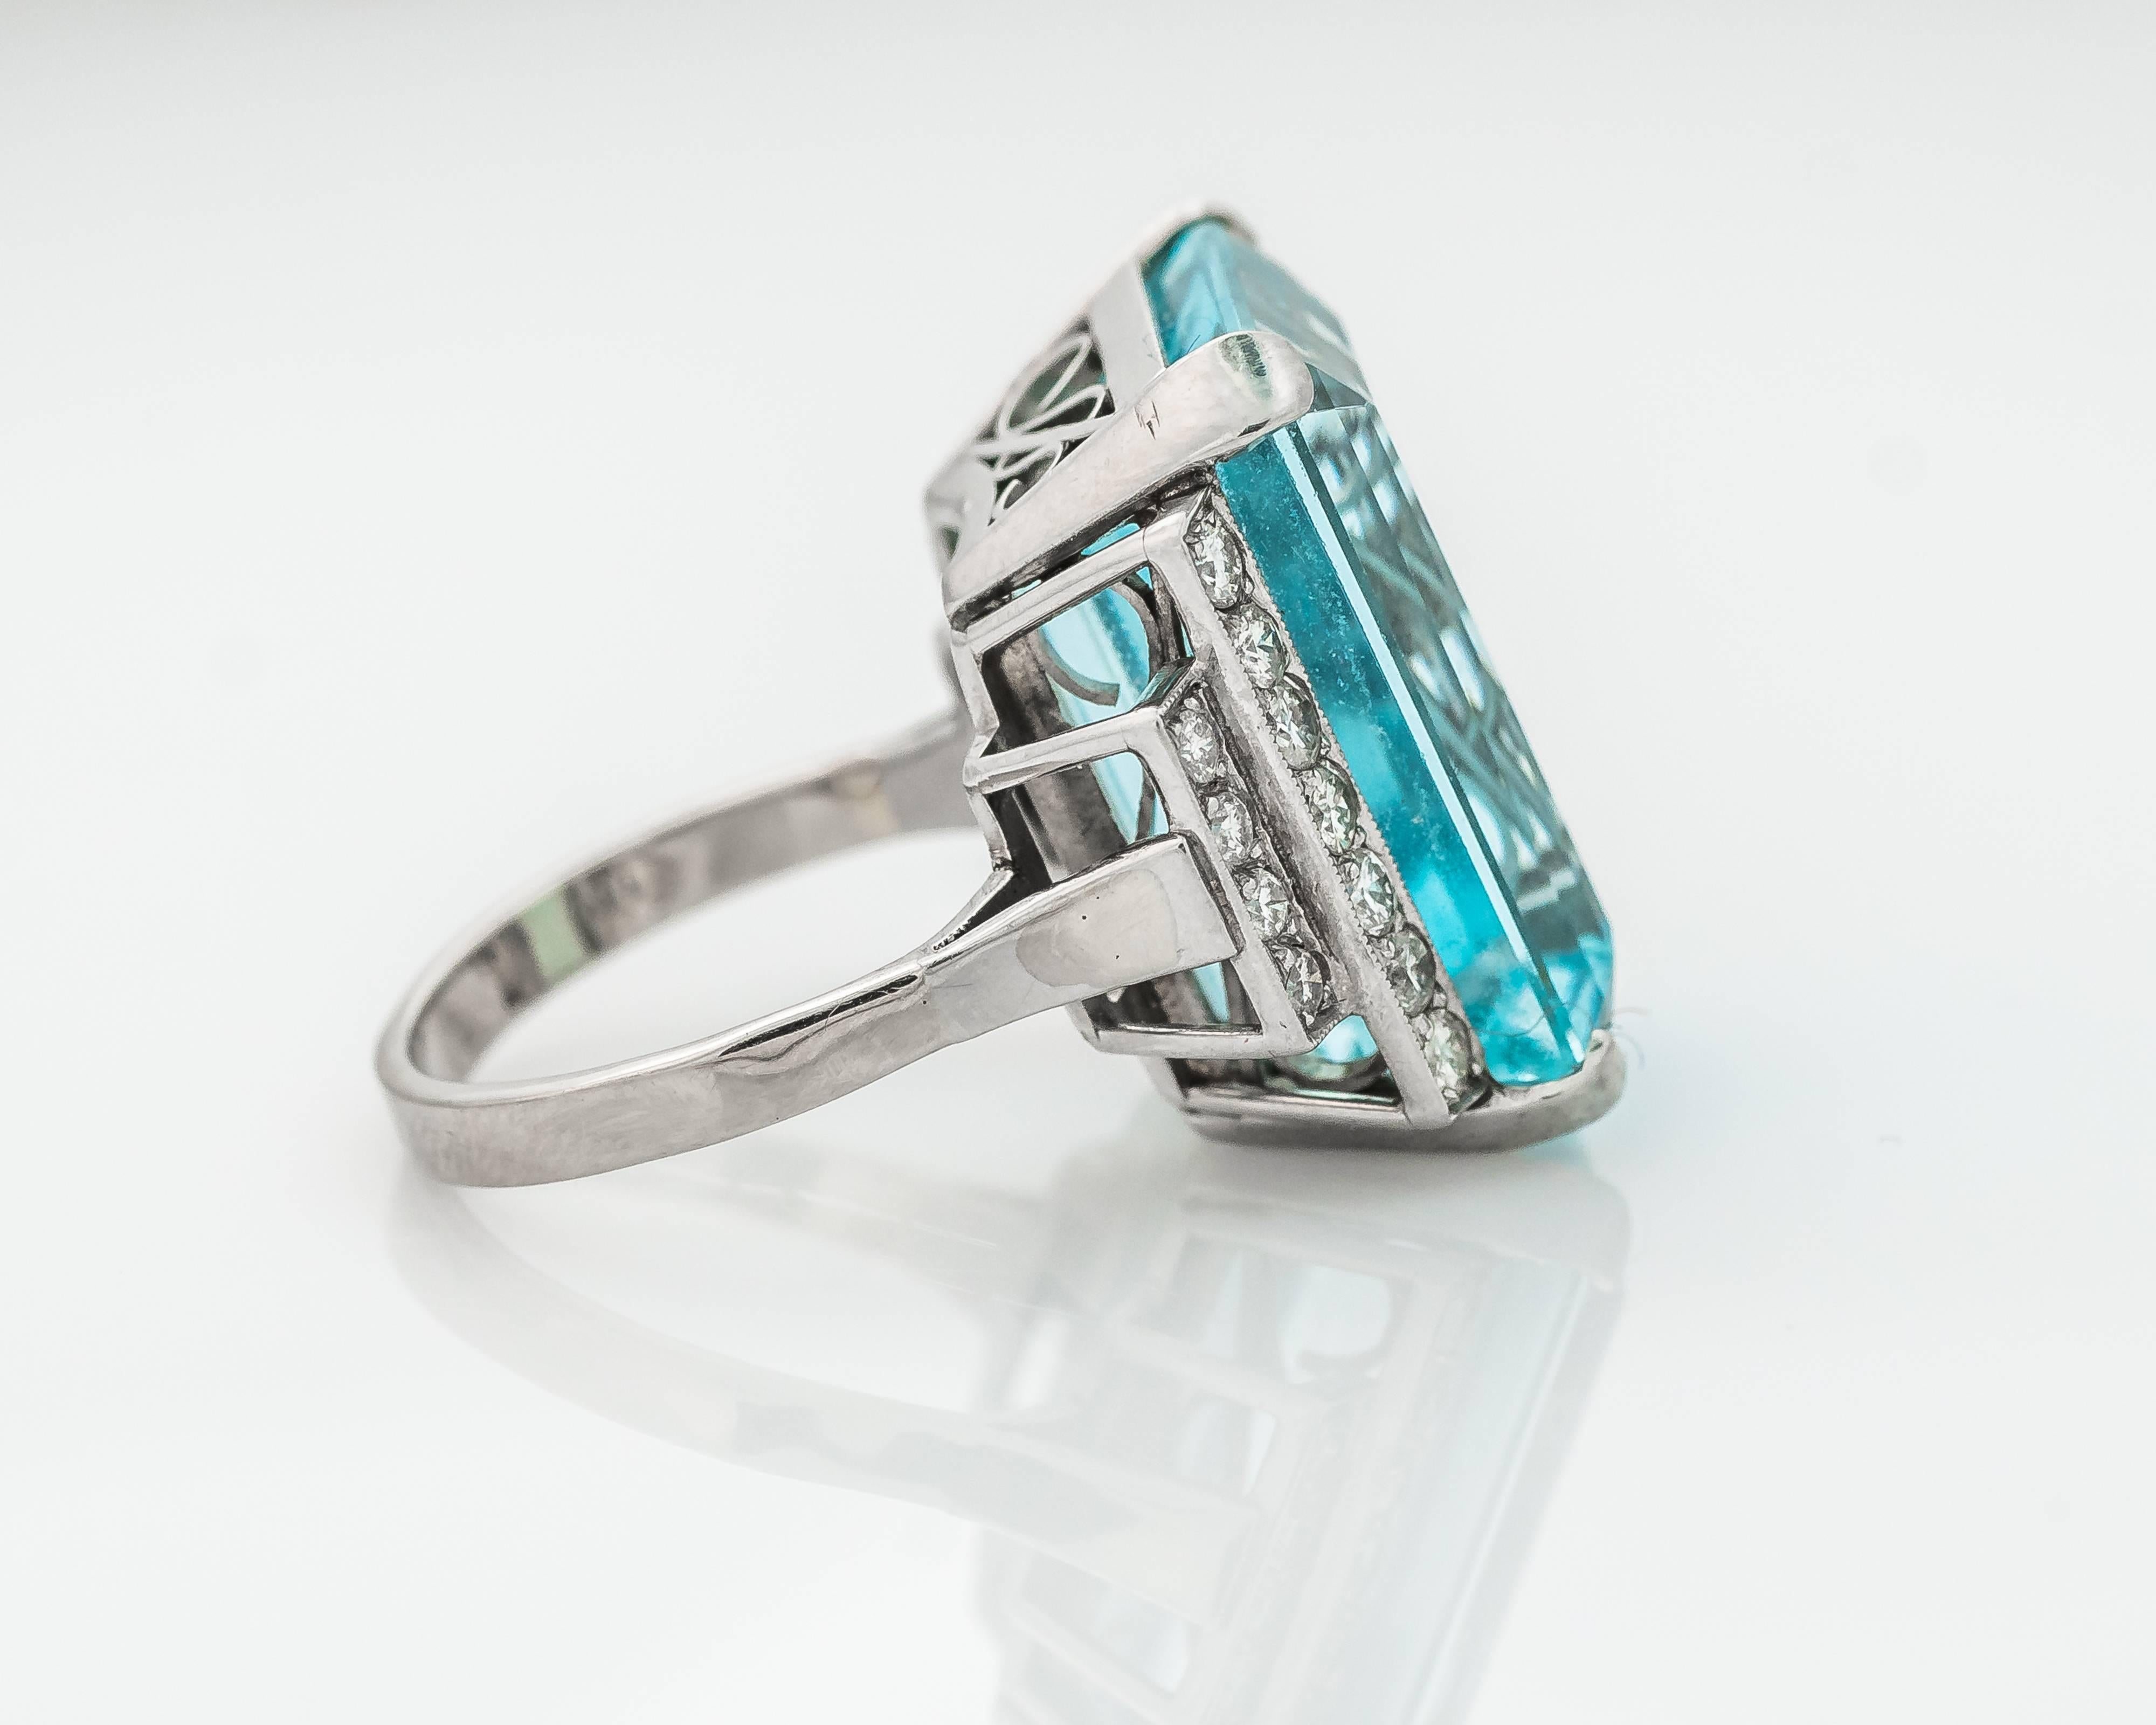 This dazzling 1964 14K White Gold, Diamond and Aquamarine Ring features a 20 carat emerald cut Aquamarine held securely in place by 4 cut corner square prongs. Measuring 21 millimeters long x 14 millimeters wide, this gorgeous Aquamarine is flanked